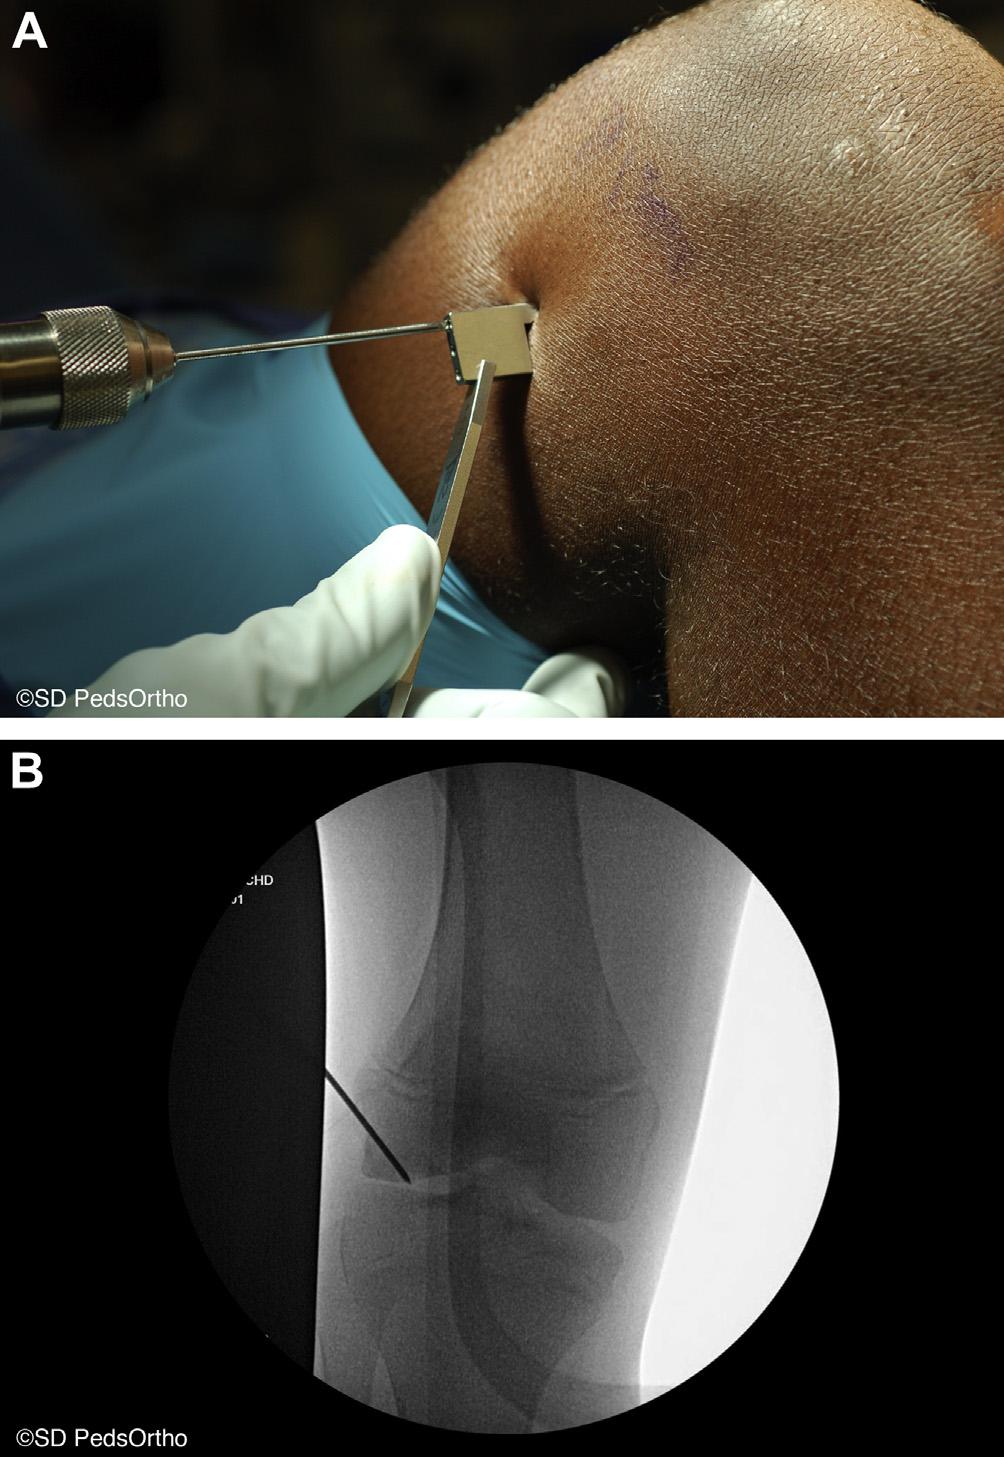 When the first Kirschner wire has been advanced to the center-center position of the OCD lesion just through the subchondral bone, but not through the articular cartilage, the Kirschner wire is cut